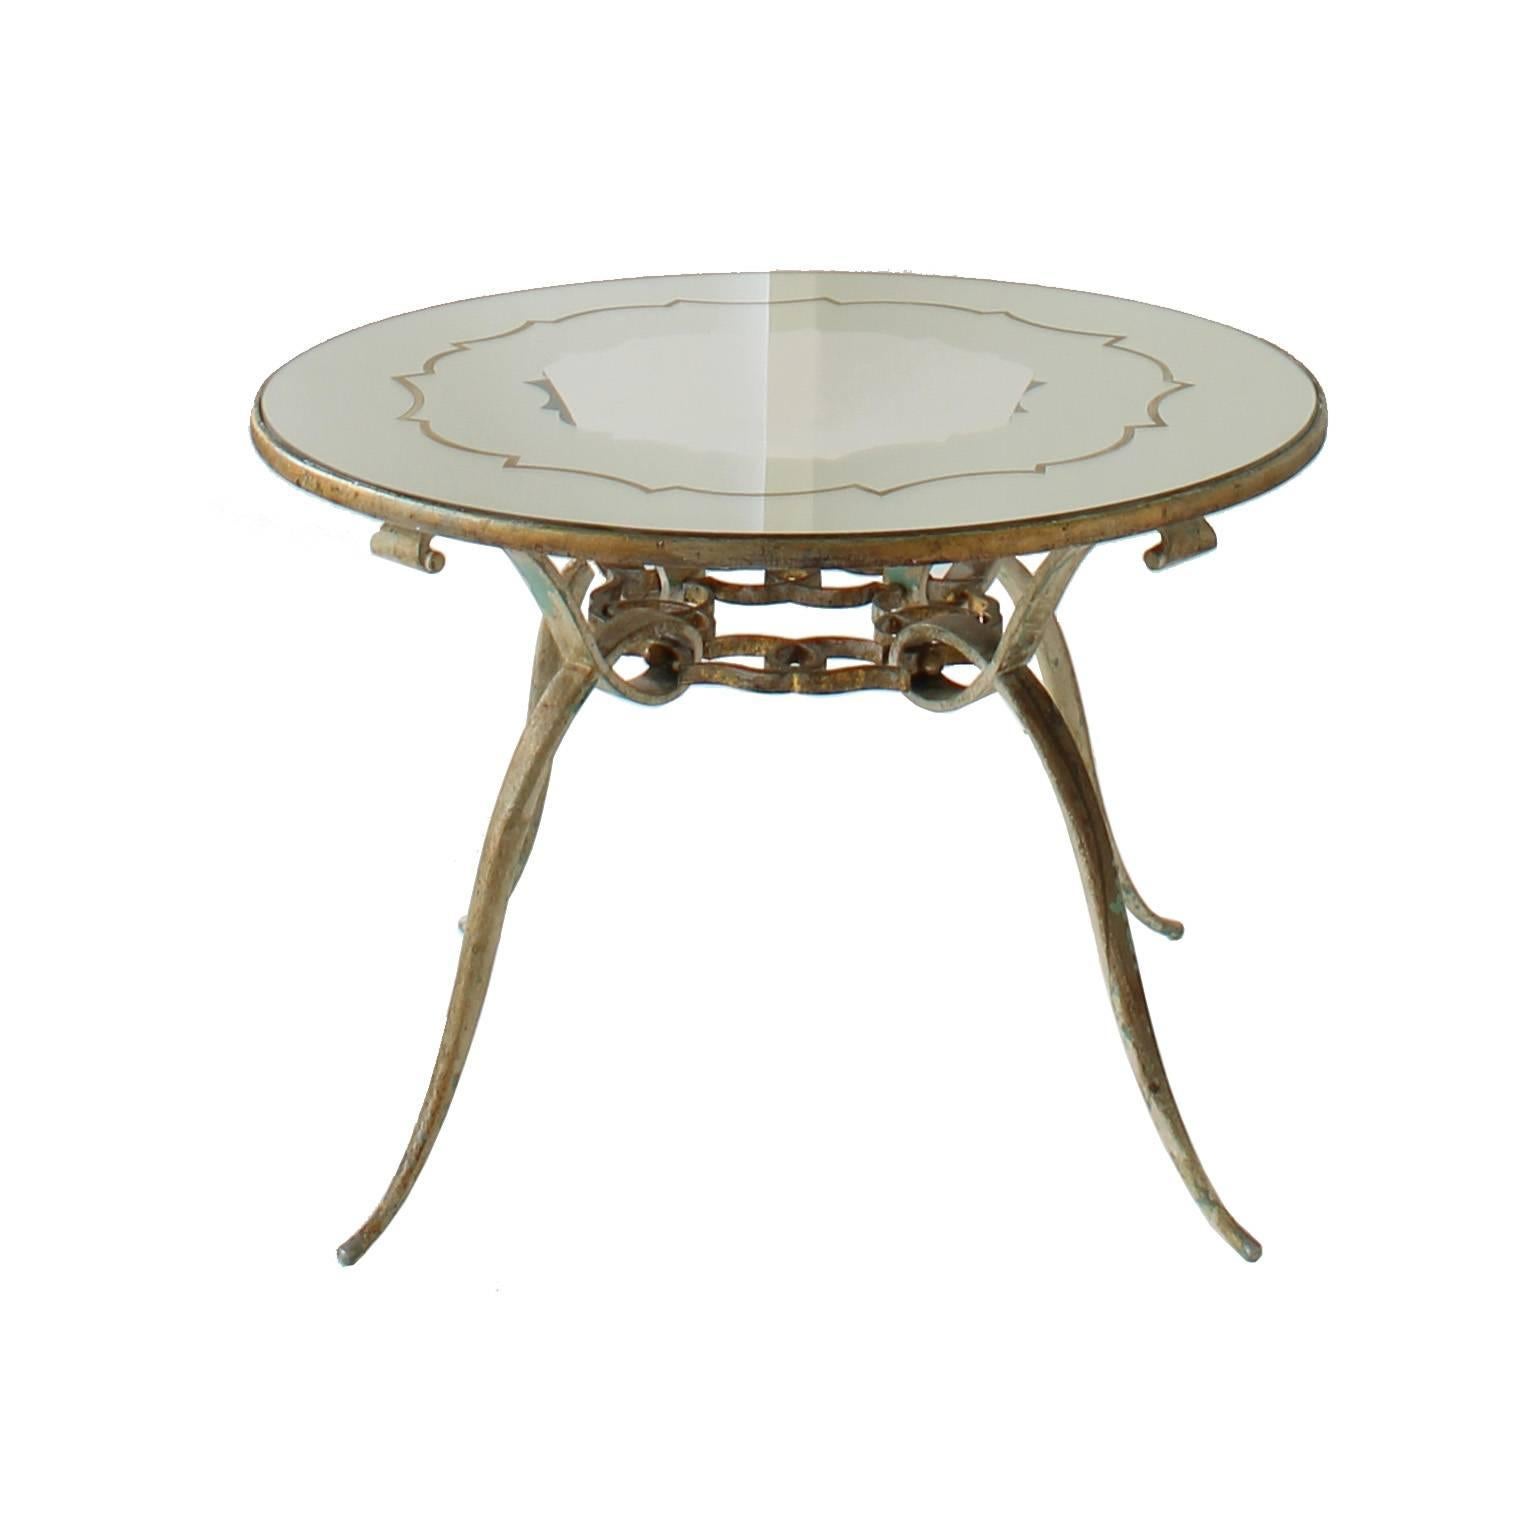 Gilt Hollywood Regency Round Pattern Mirrored Coffee Table with 1930s French Sconces